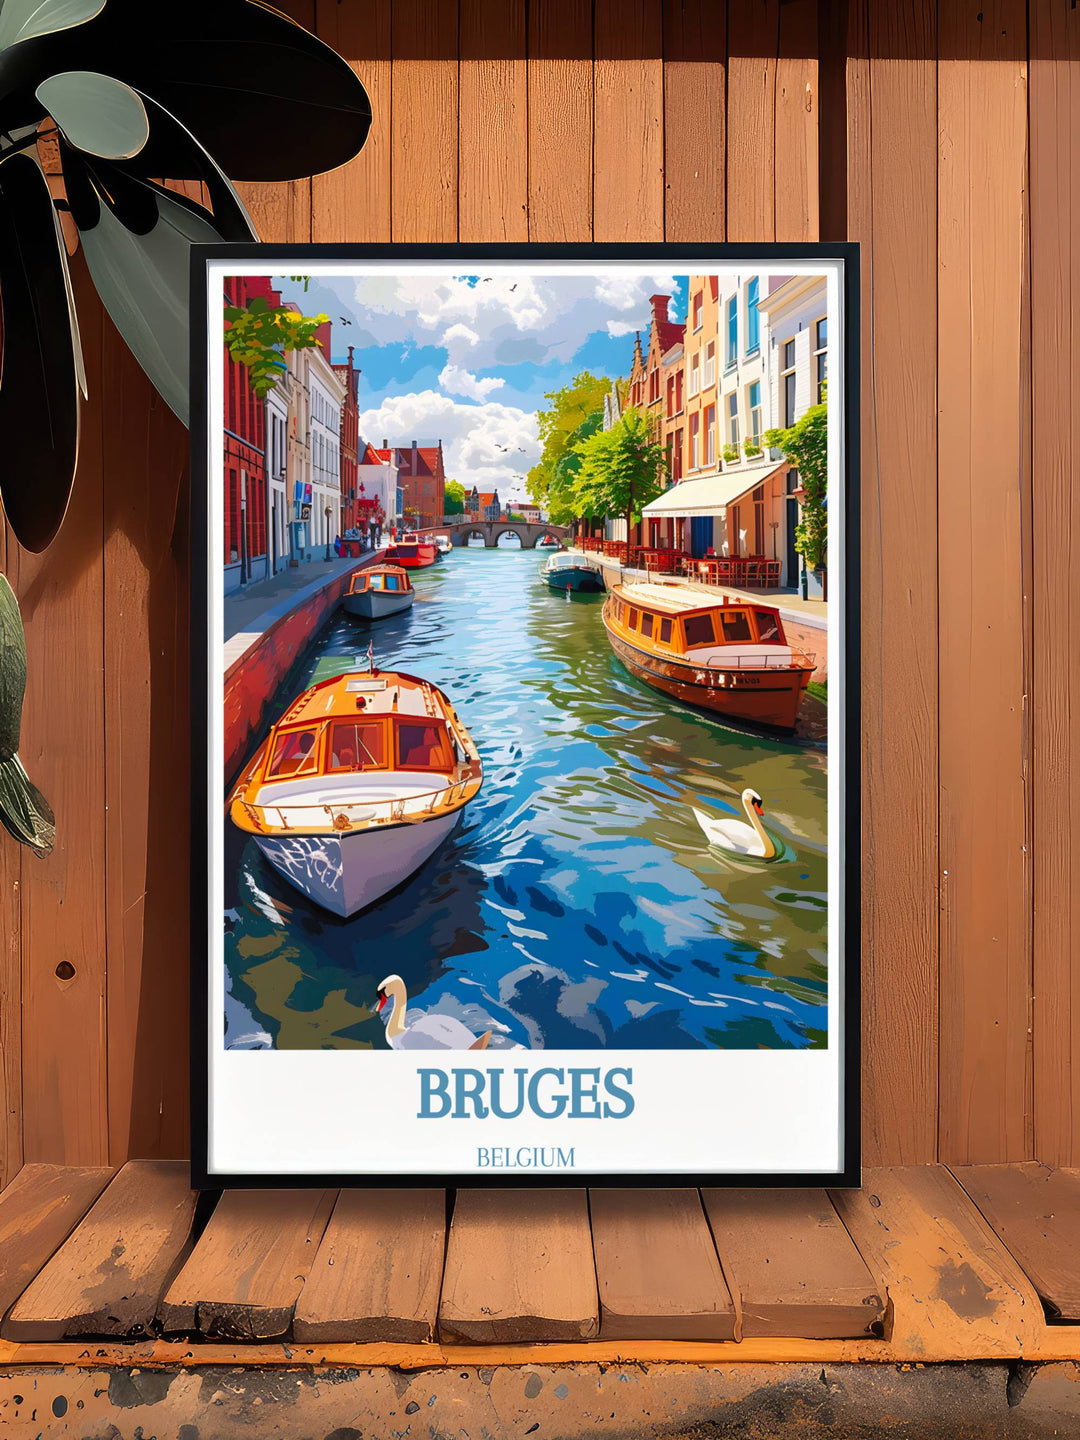 Springtime along the canal of Bruges with blooming flowers and traditional architecture in a scenic wall art